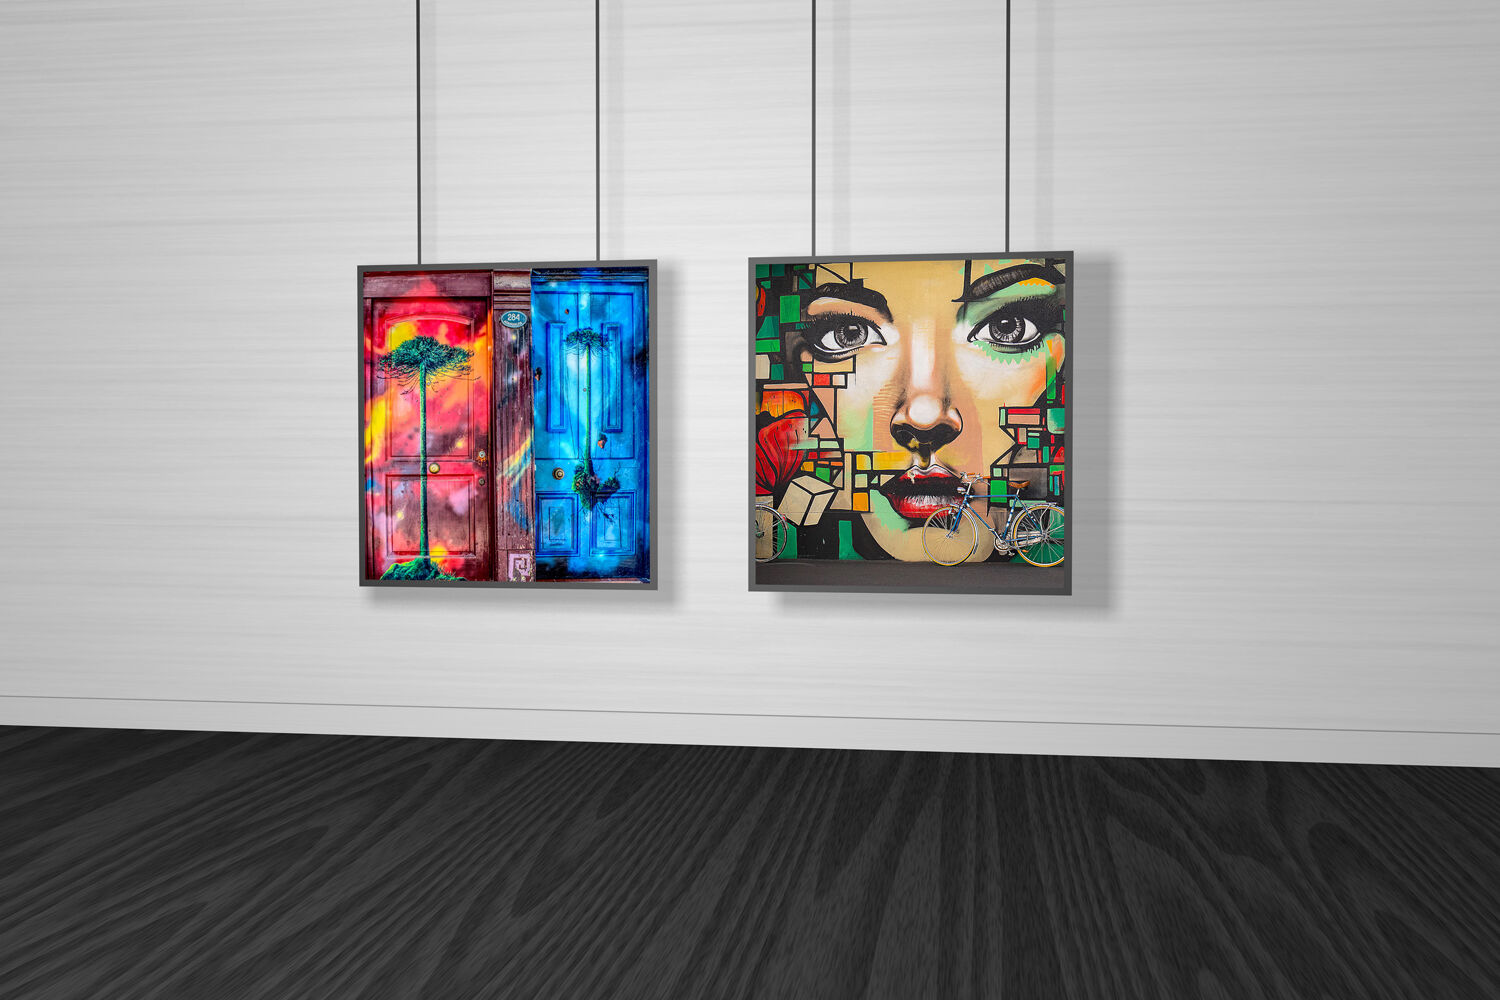 Mockup Featuring Two Gallery Frames Hung From the Ceiling FREE PSD